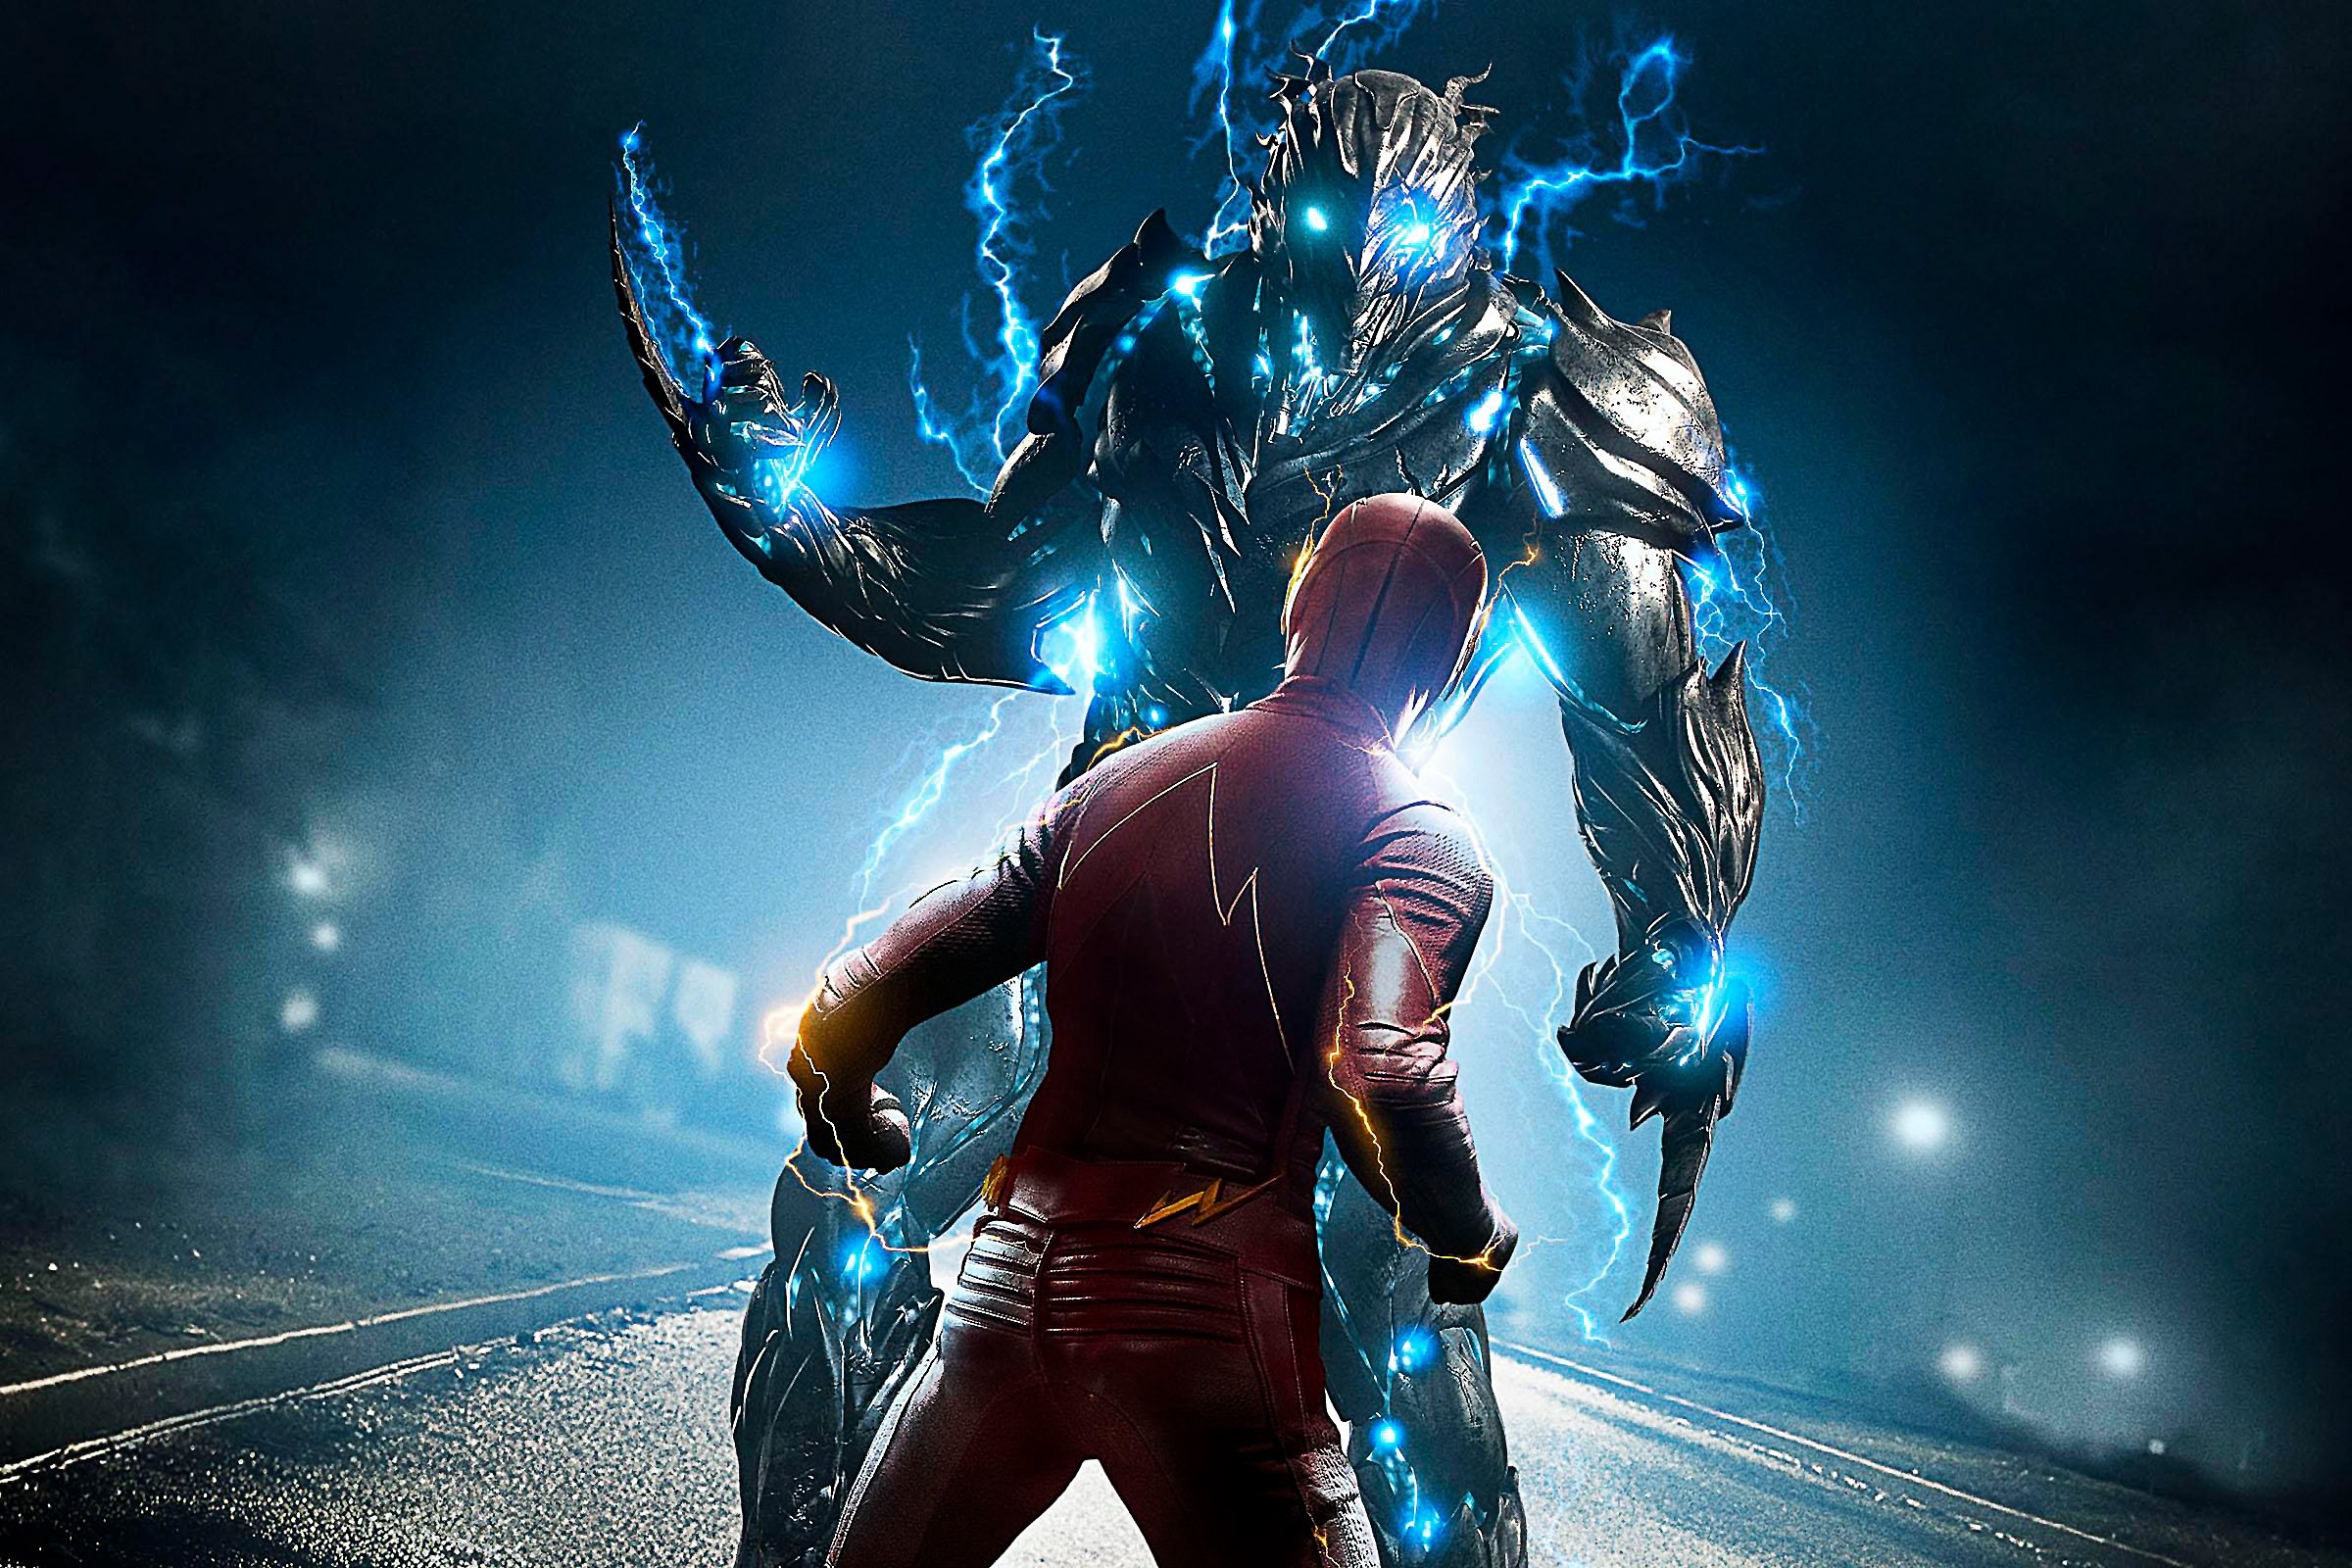 Cw Flash iPhone Wallpaper (79+ images)